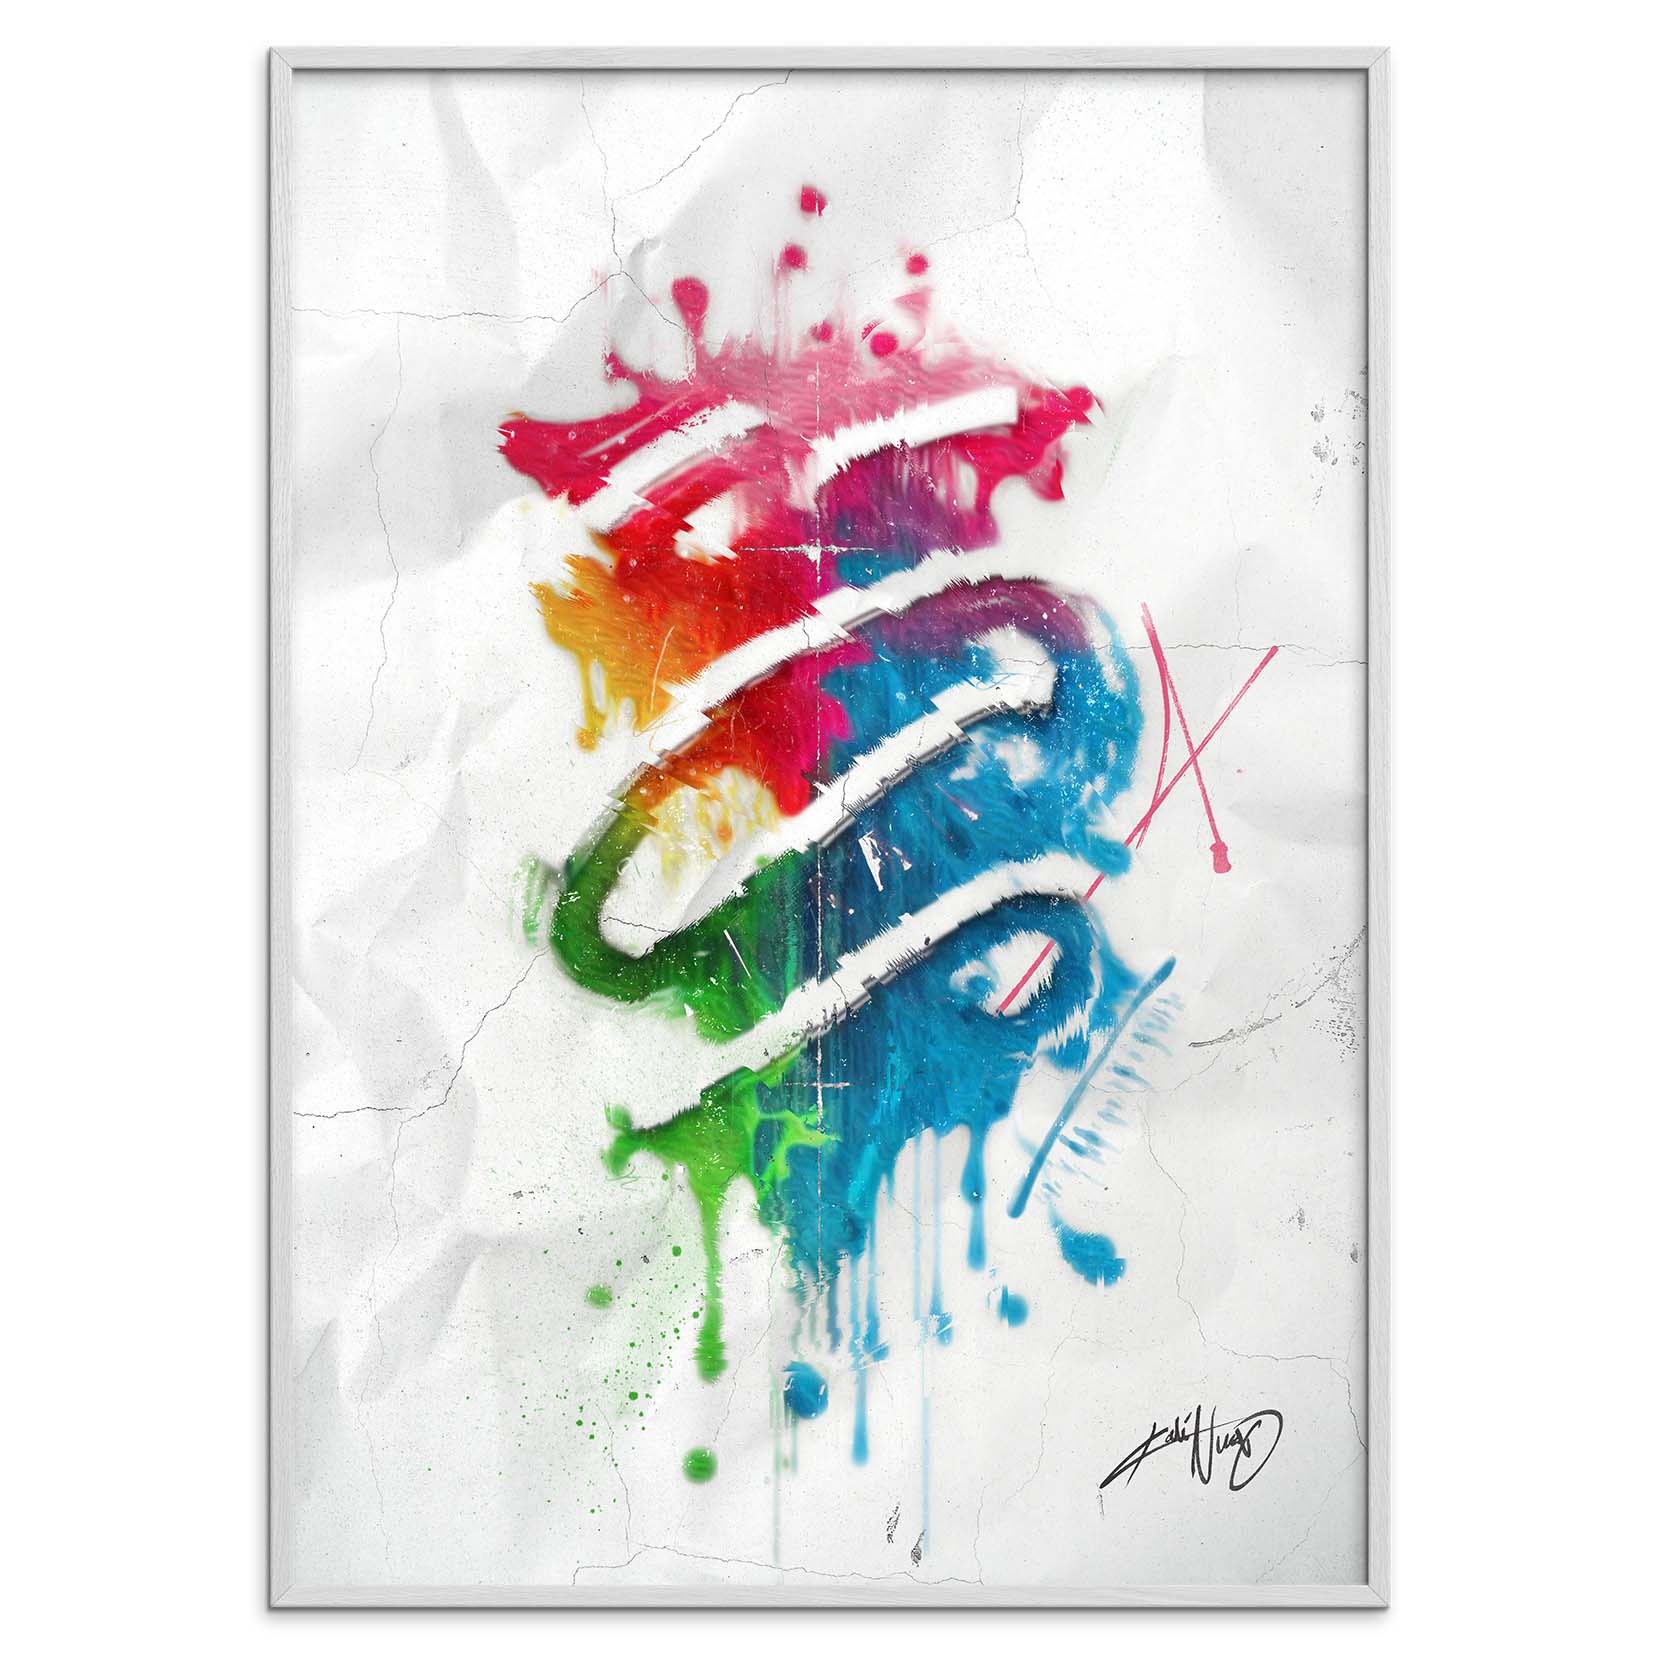 colorful abstract art poster in a white wood frame on a white background